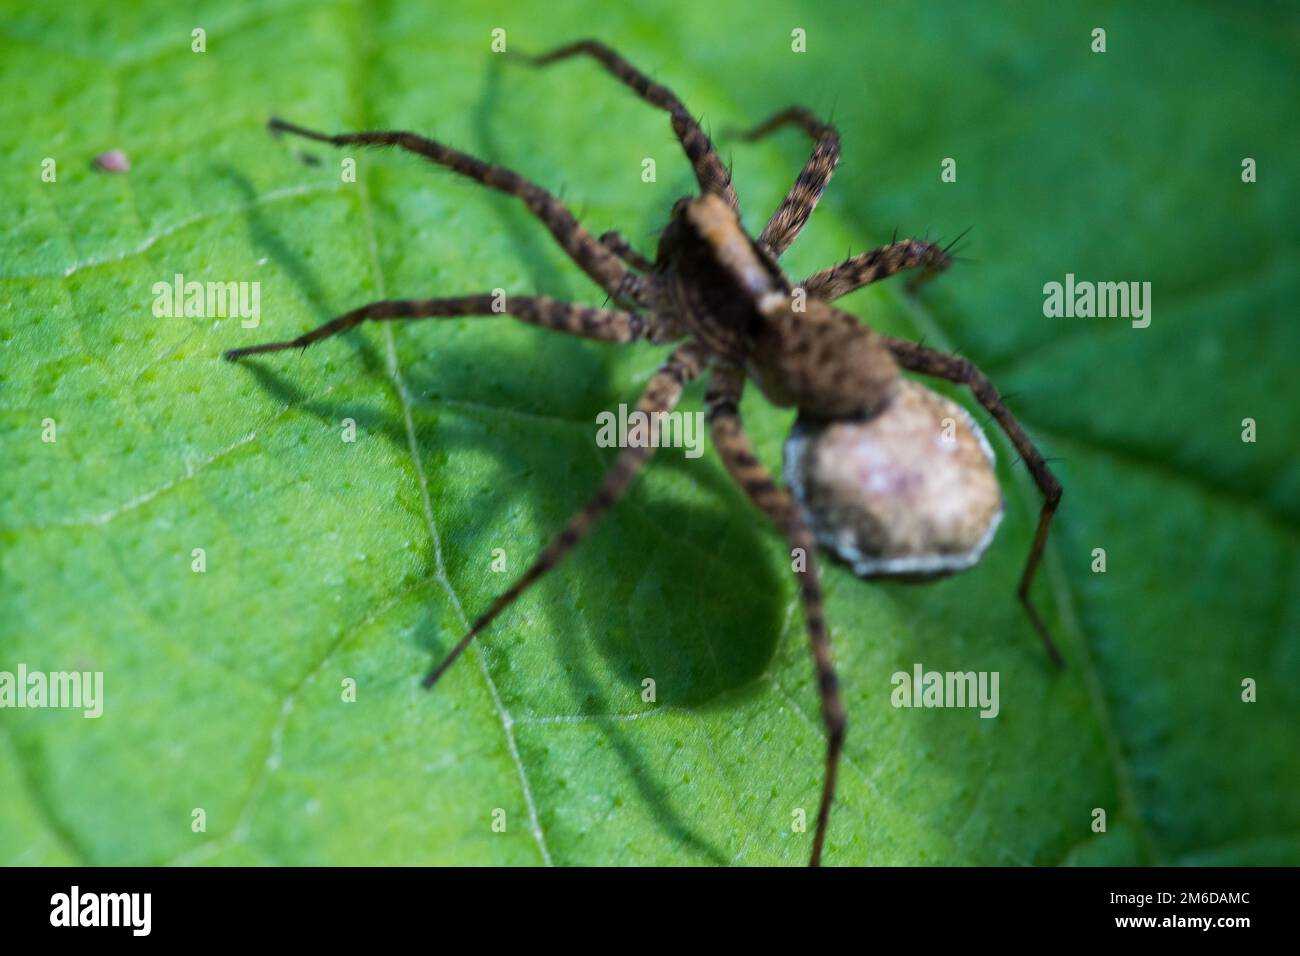 Wolf spider crawling over blackberry leaf Stock Photo